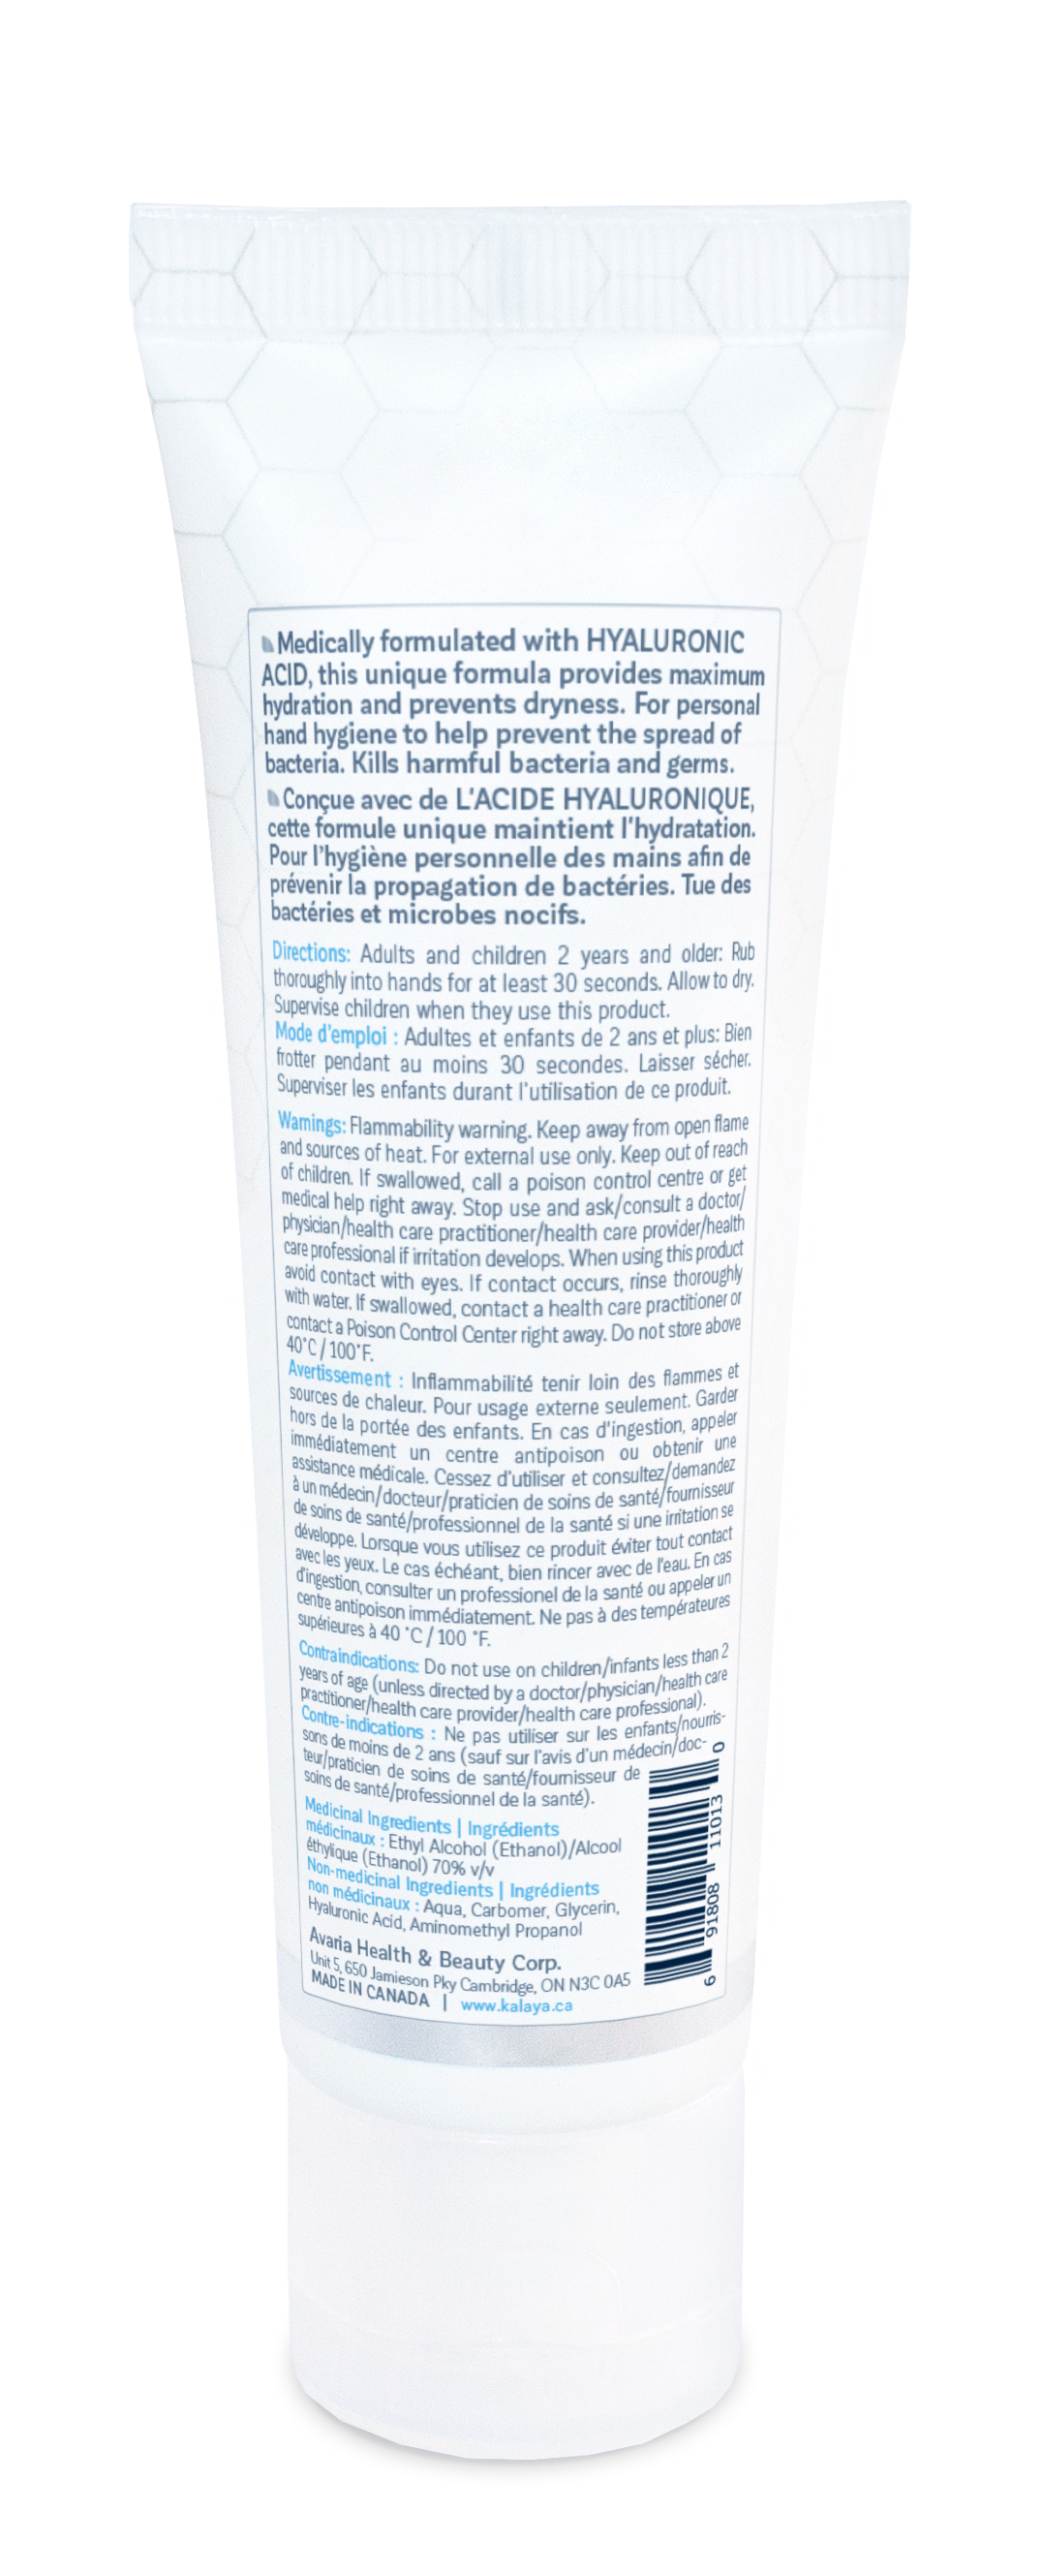 Back view of Kalaya 60mL hand sanitizer tube Canadian packaging instructions in french and english